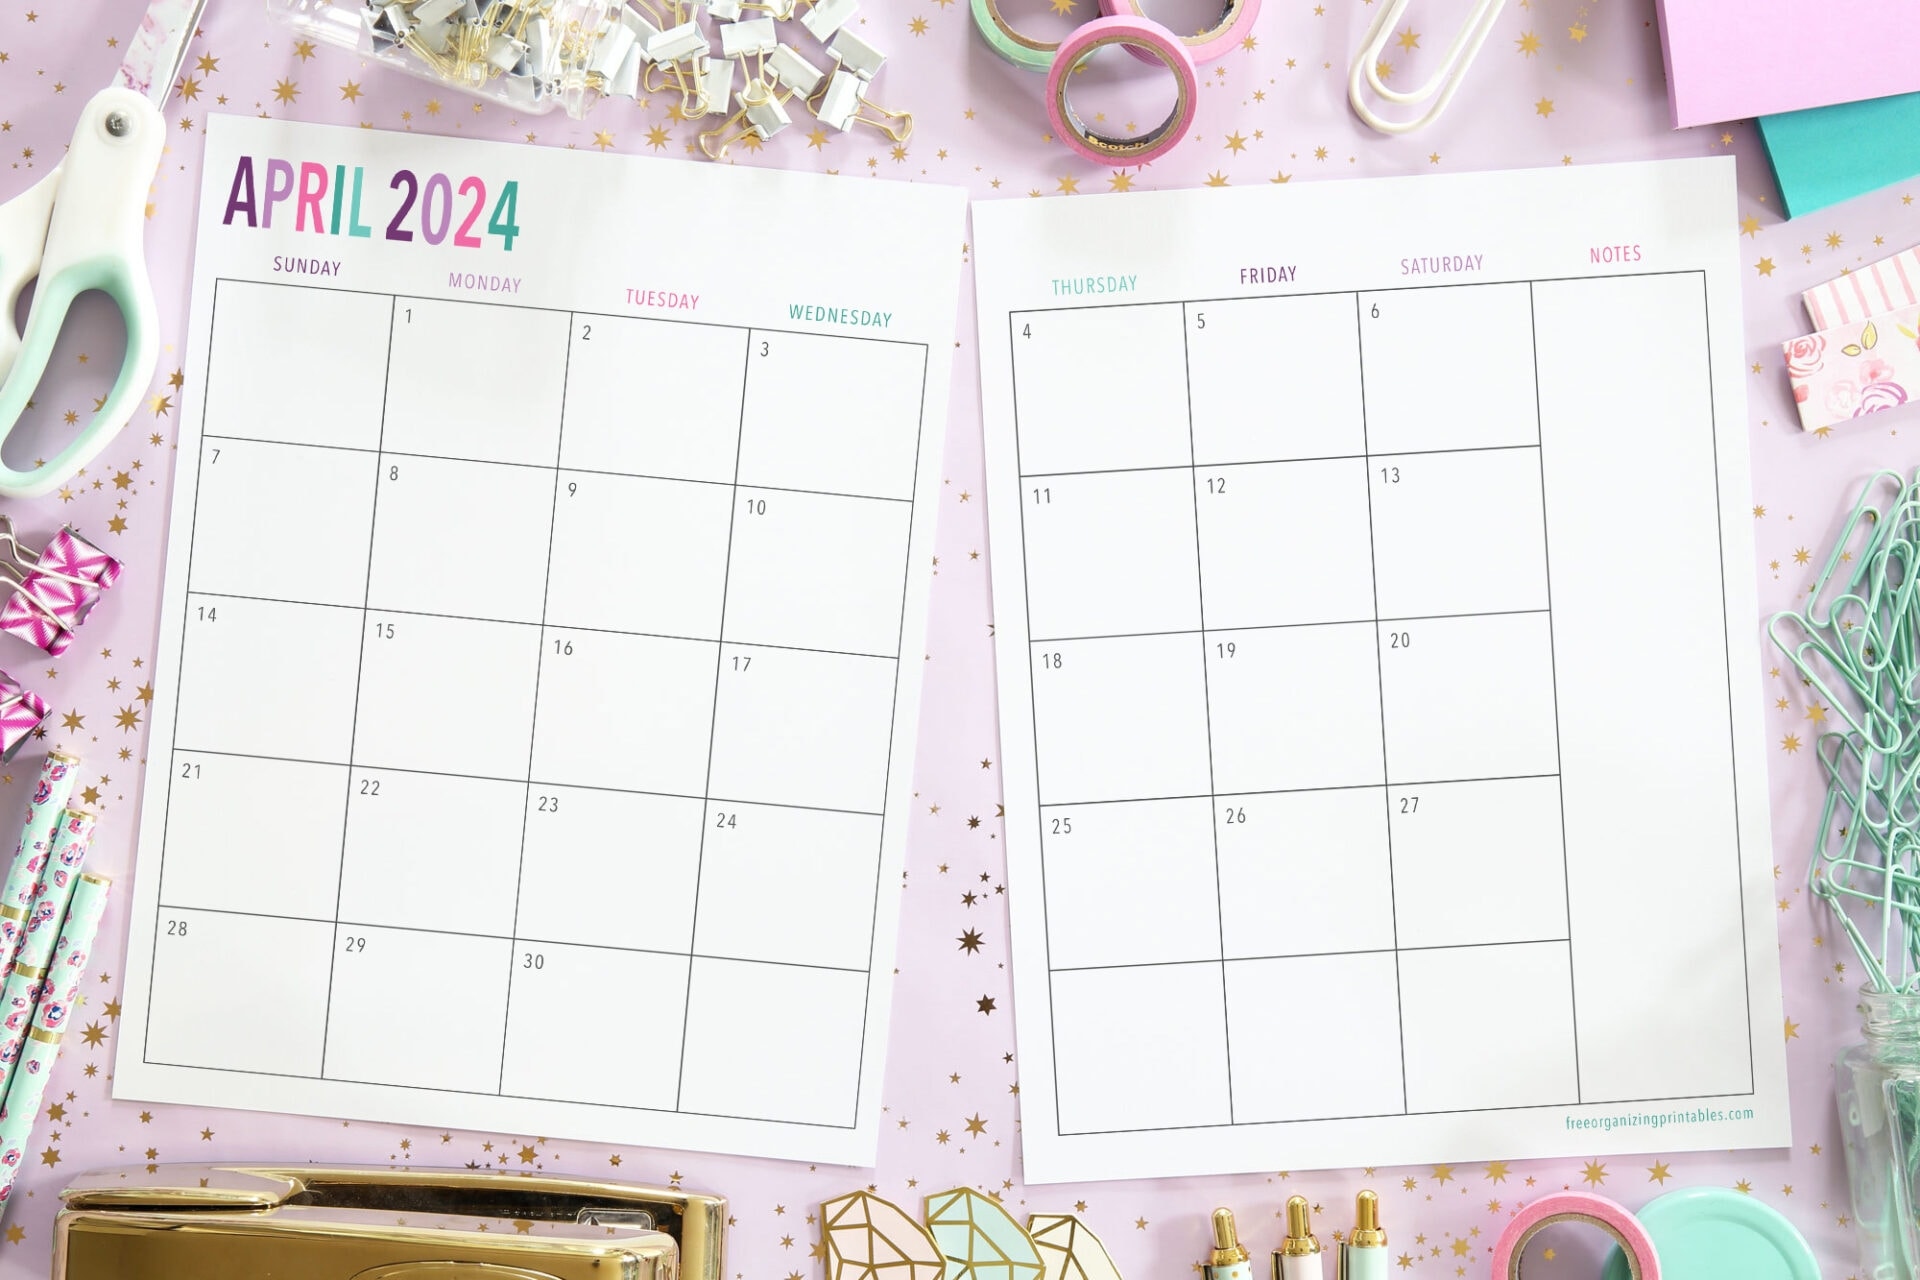 Free Printable 2 Page Blank Monthly Calendar 2024 with regard to Free Printable Binder Calendar 2024